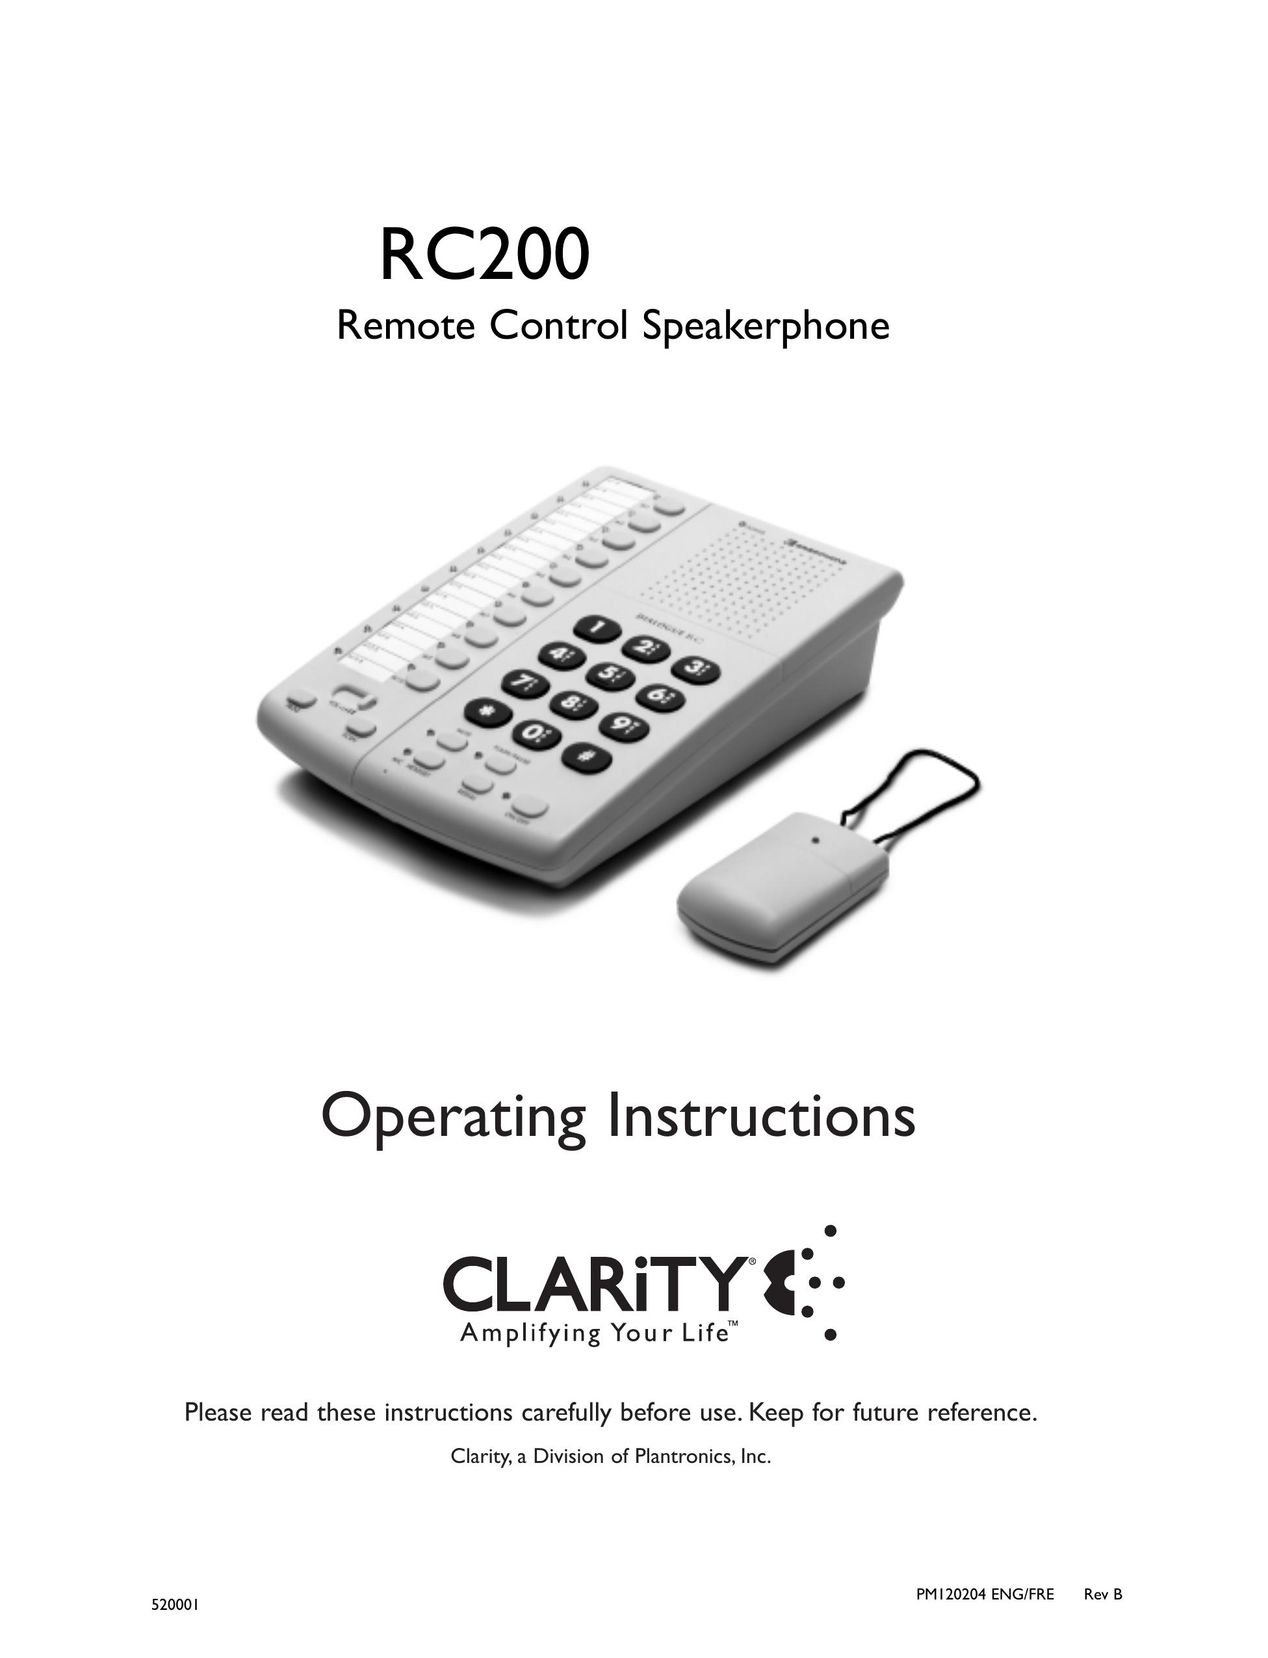 Clarity RC200 Conference Phone User Manual